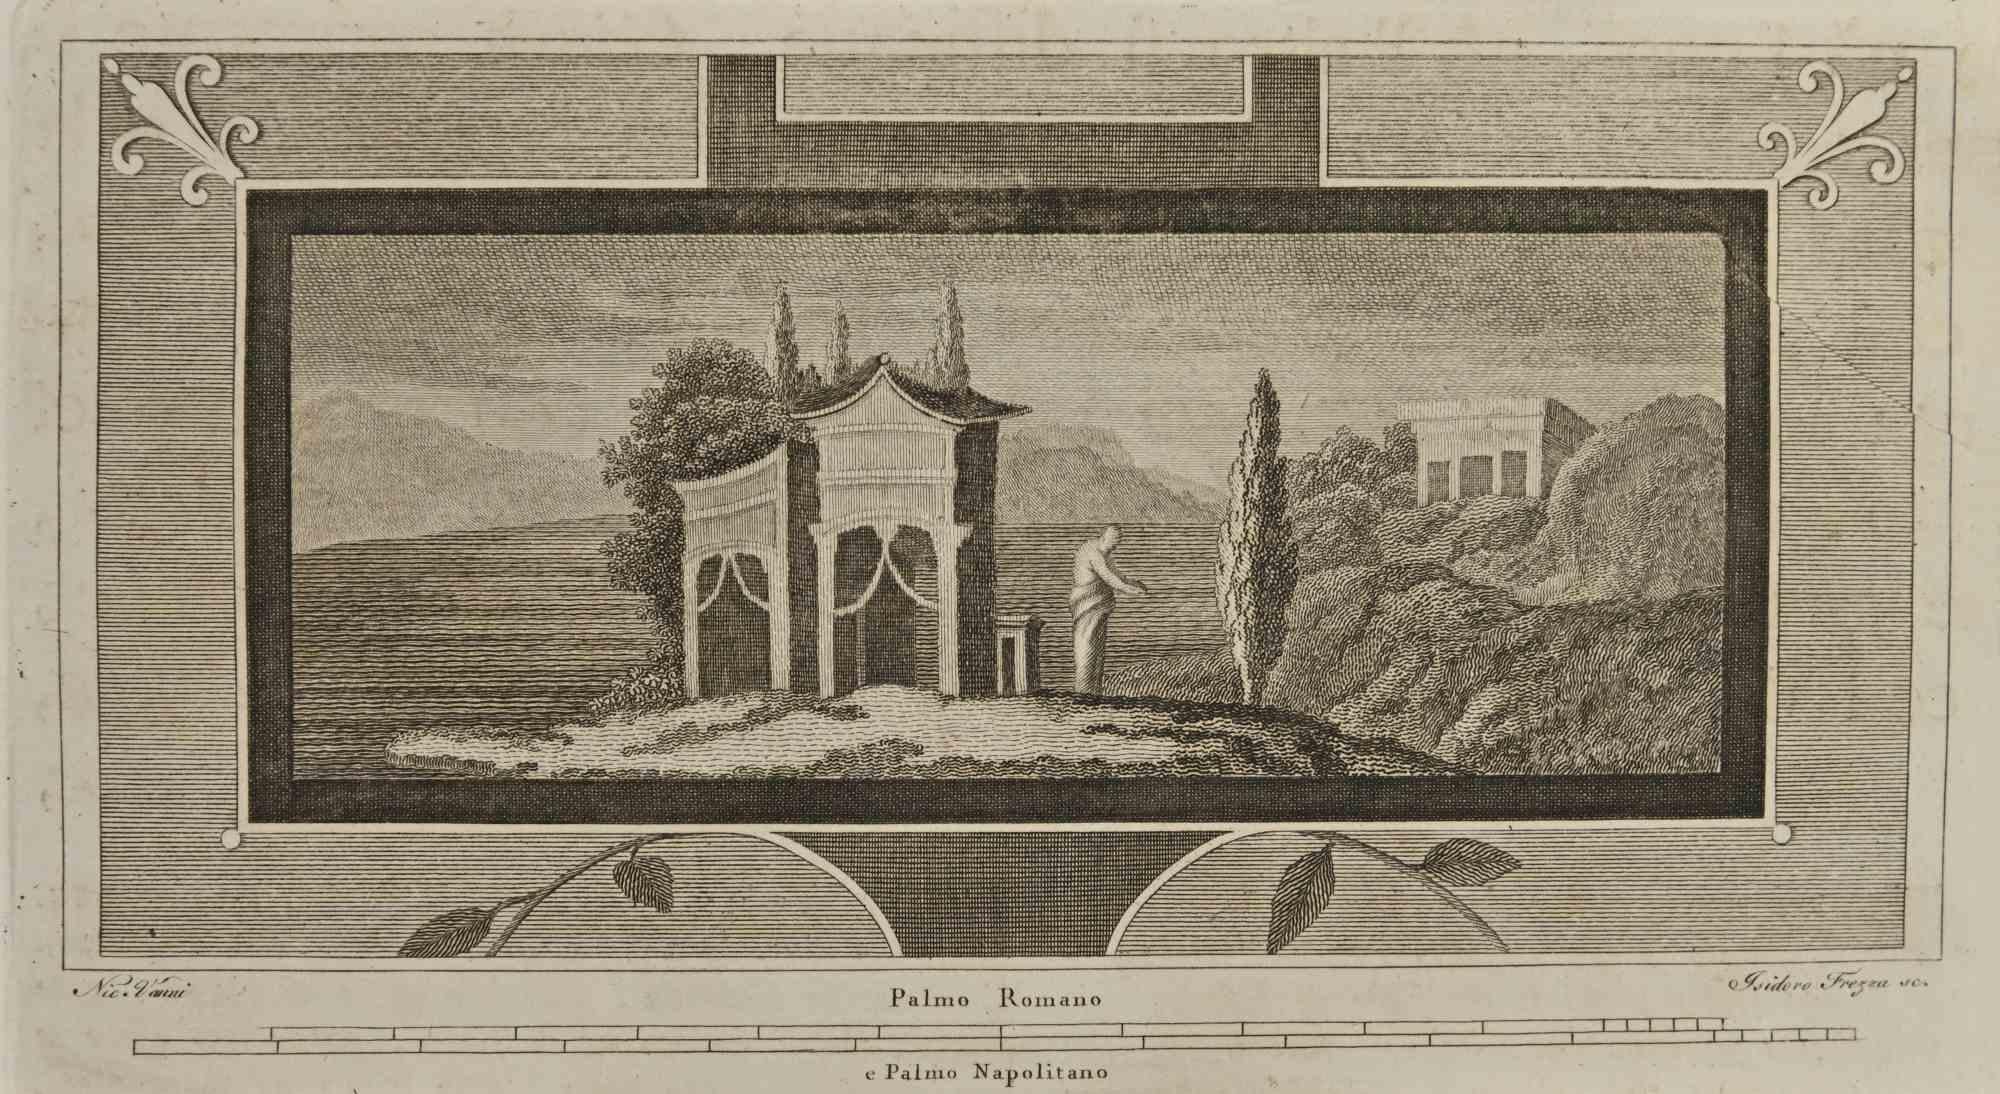 Roman Temple Fresco from "Antiquities of Herculaneum" is an etching on paper realized by Isidoro Frezza in  the 18th Century.

Signed on the plate.

Good conditions with some folding.

The etching belongs to the print suite “Antiquities of